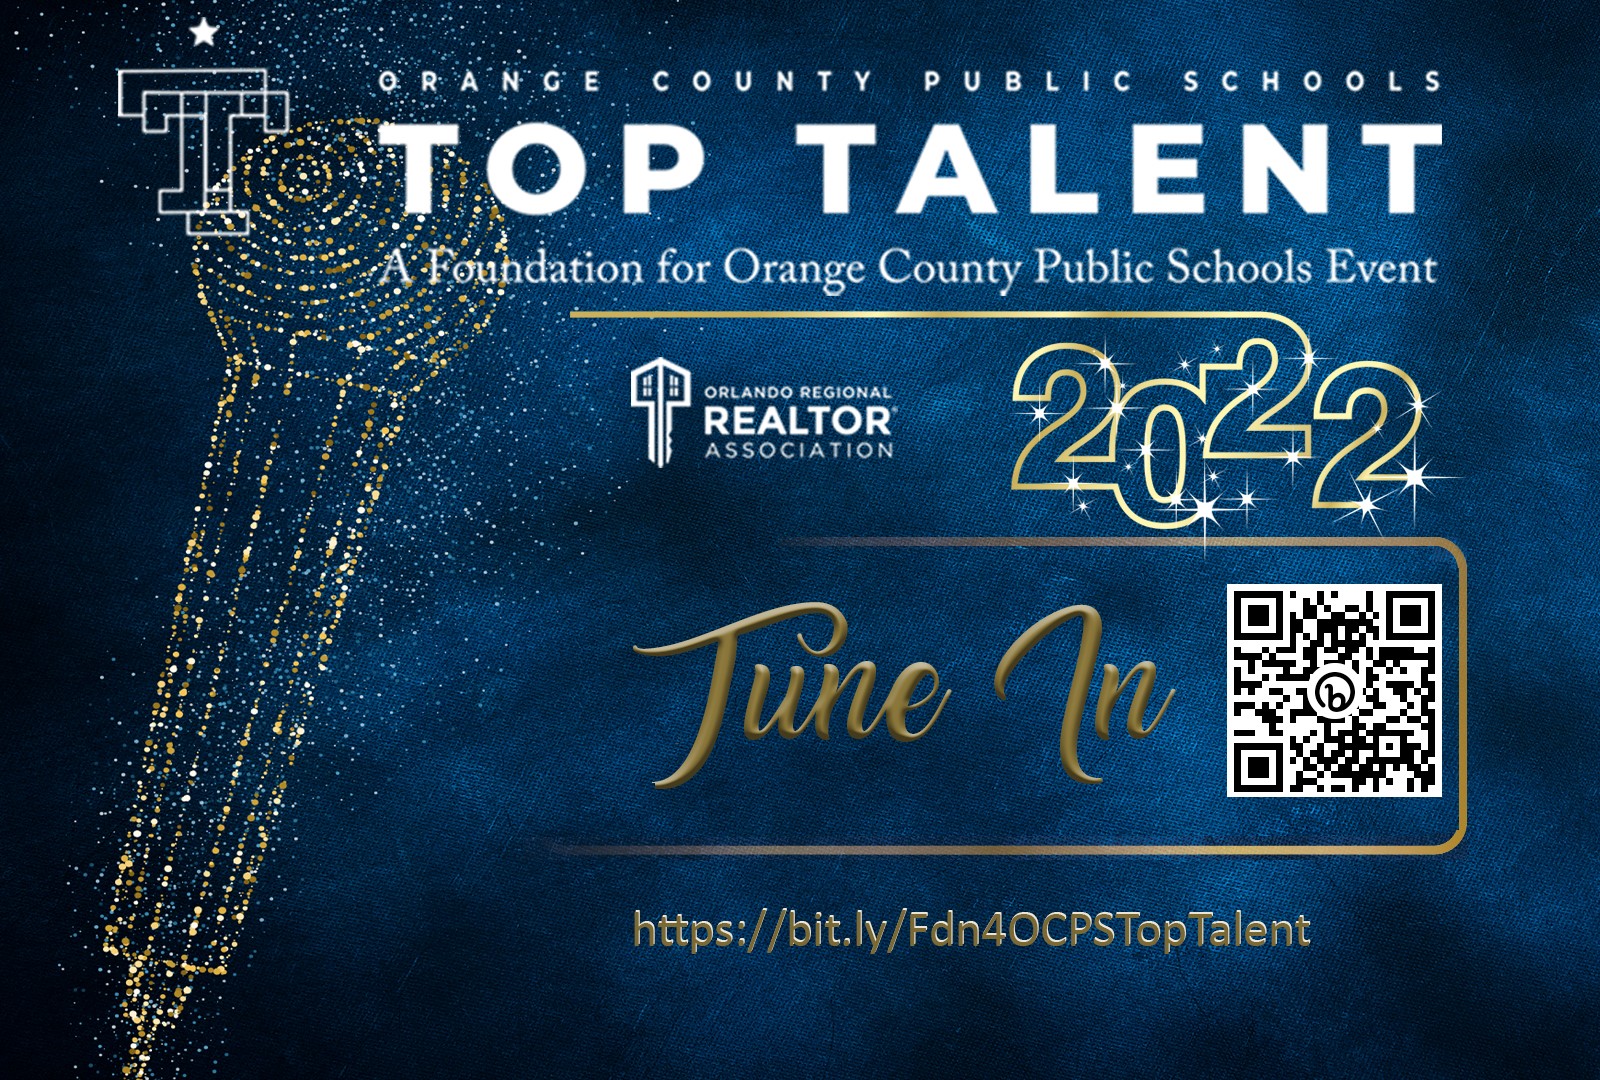 The Foundation for OCPS Top Talent